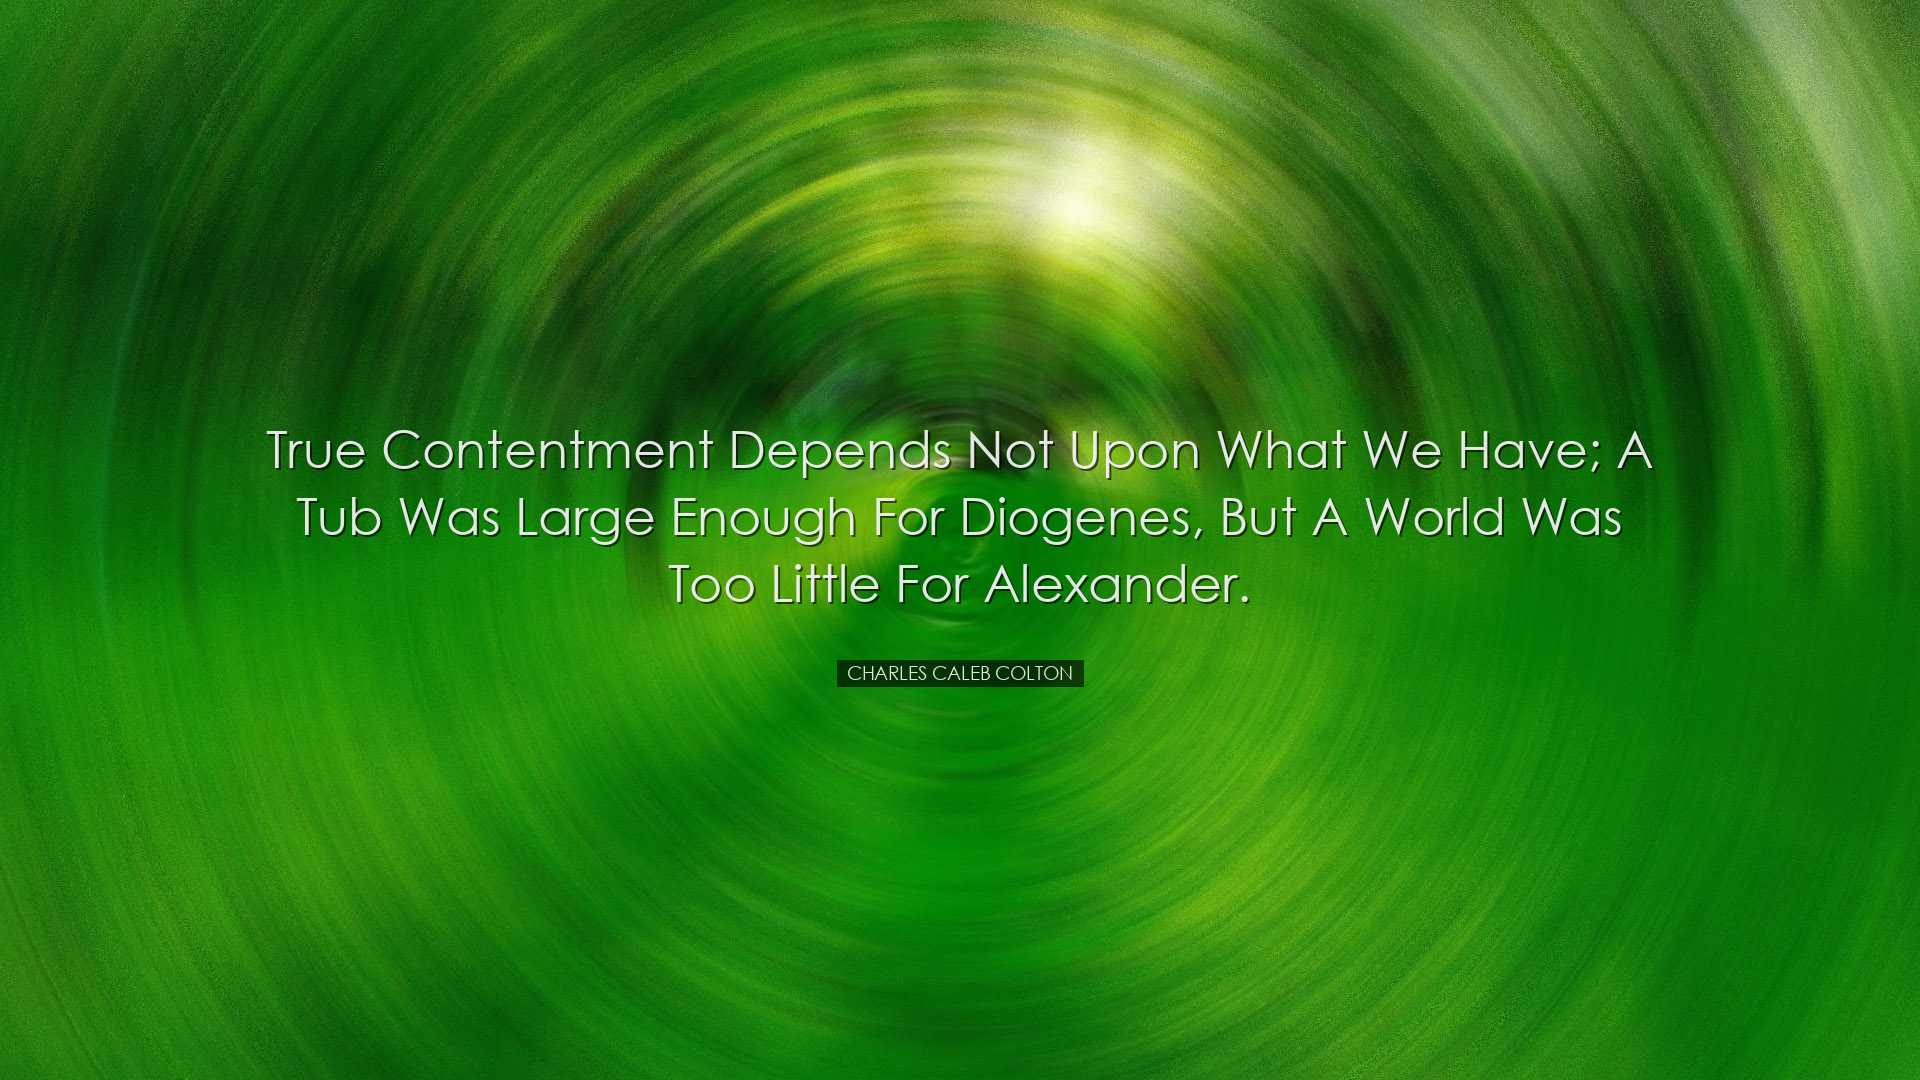 True contentment depends not upon what we have; a tub was large en